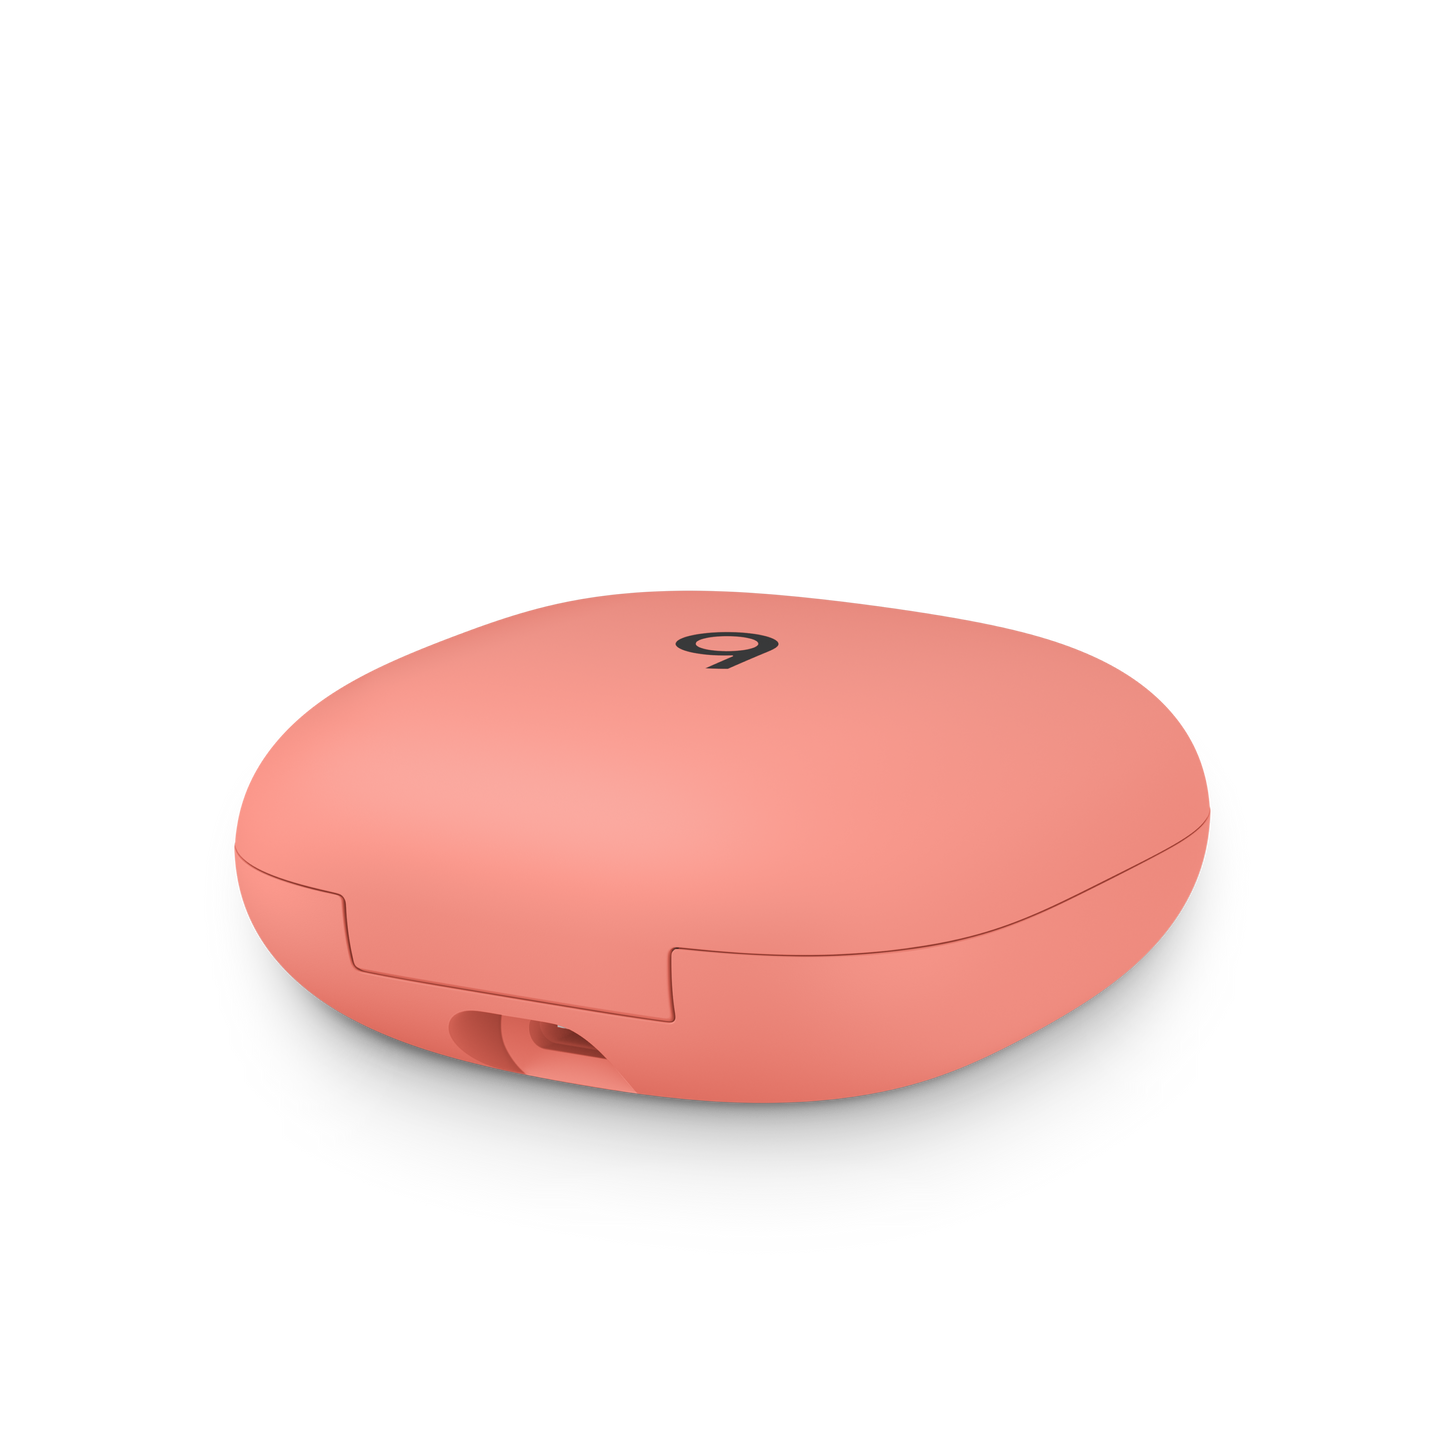 Beats Fit Pro True Wireless Earbuds - Coral Pink